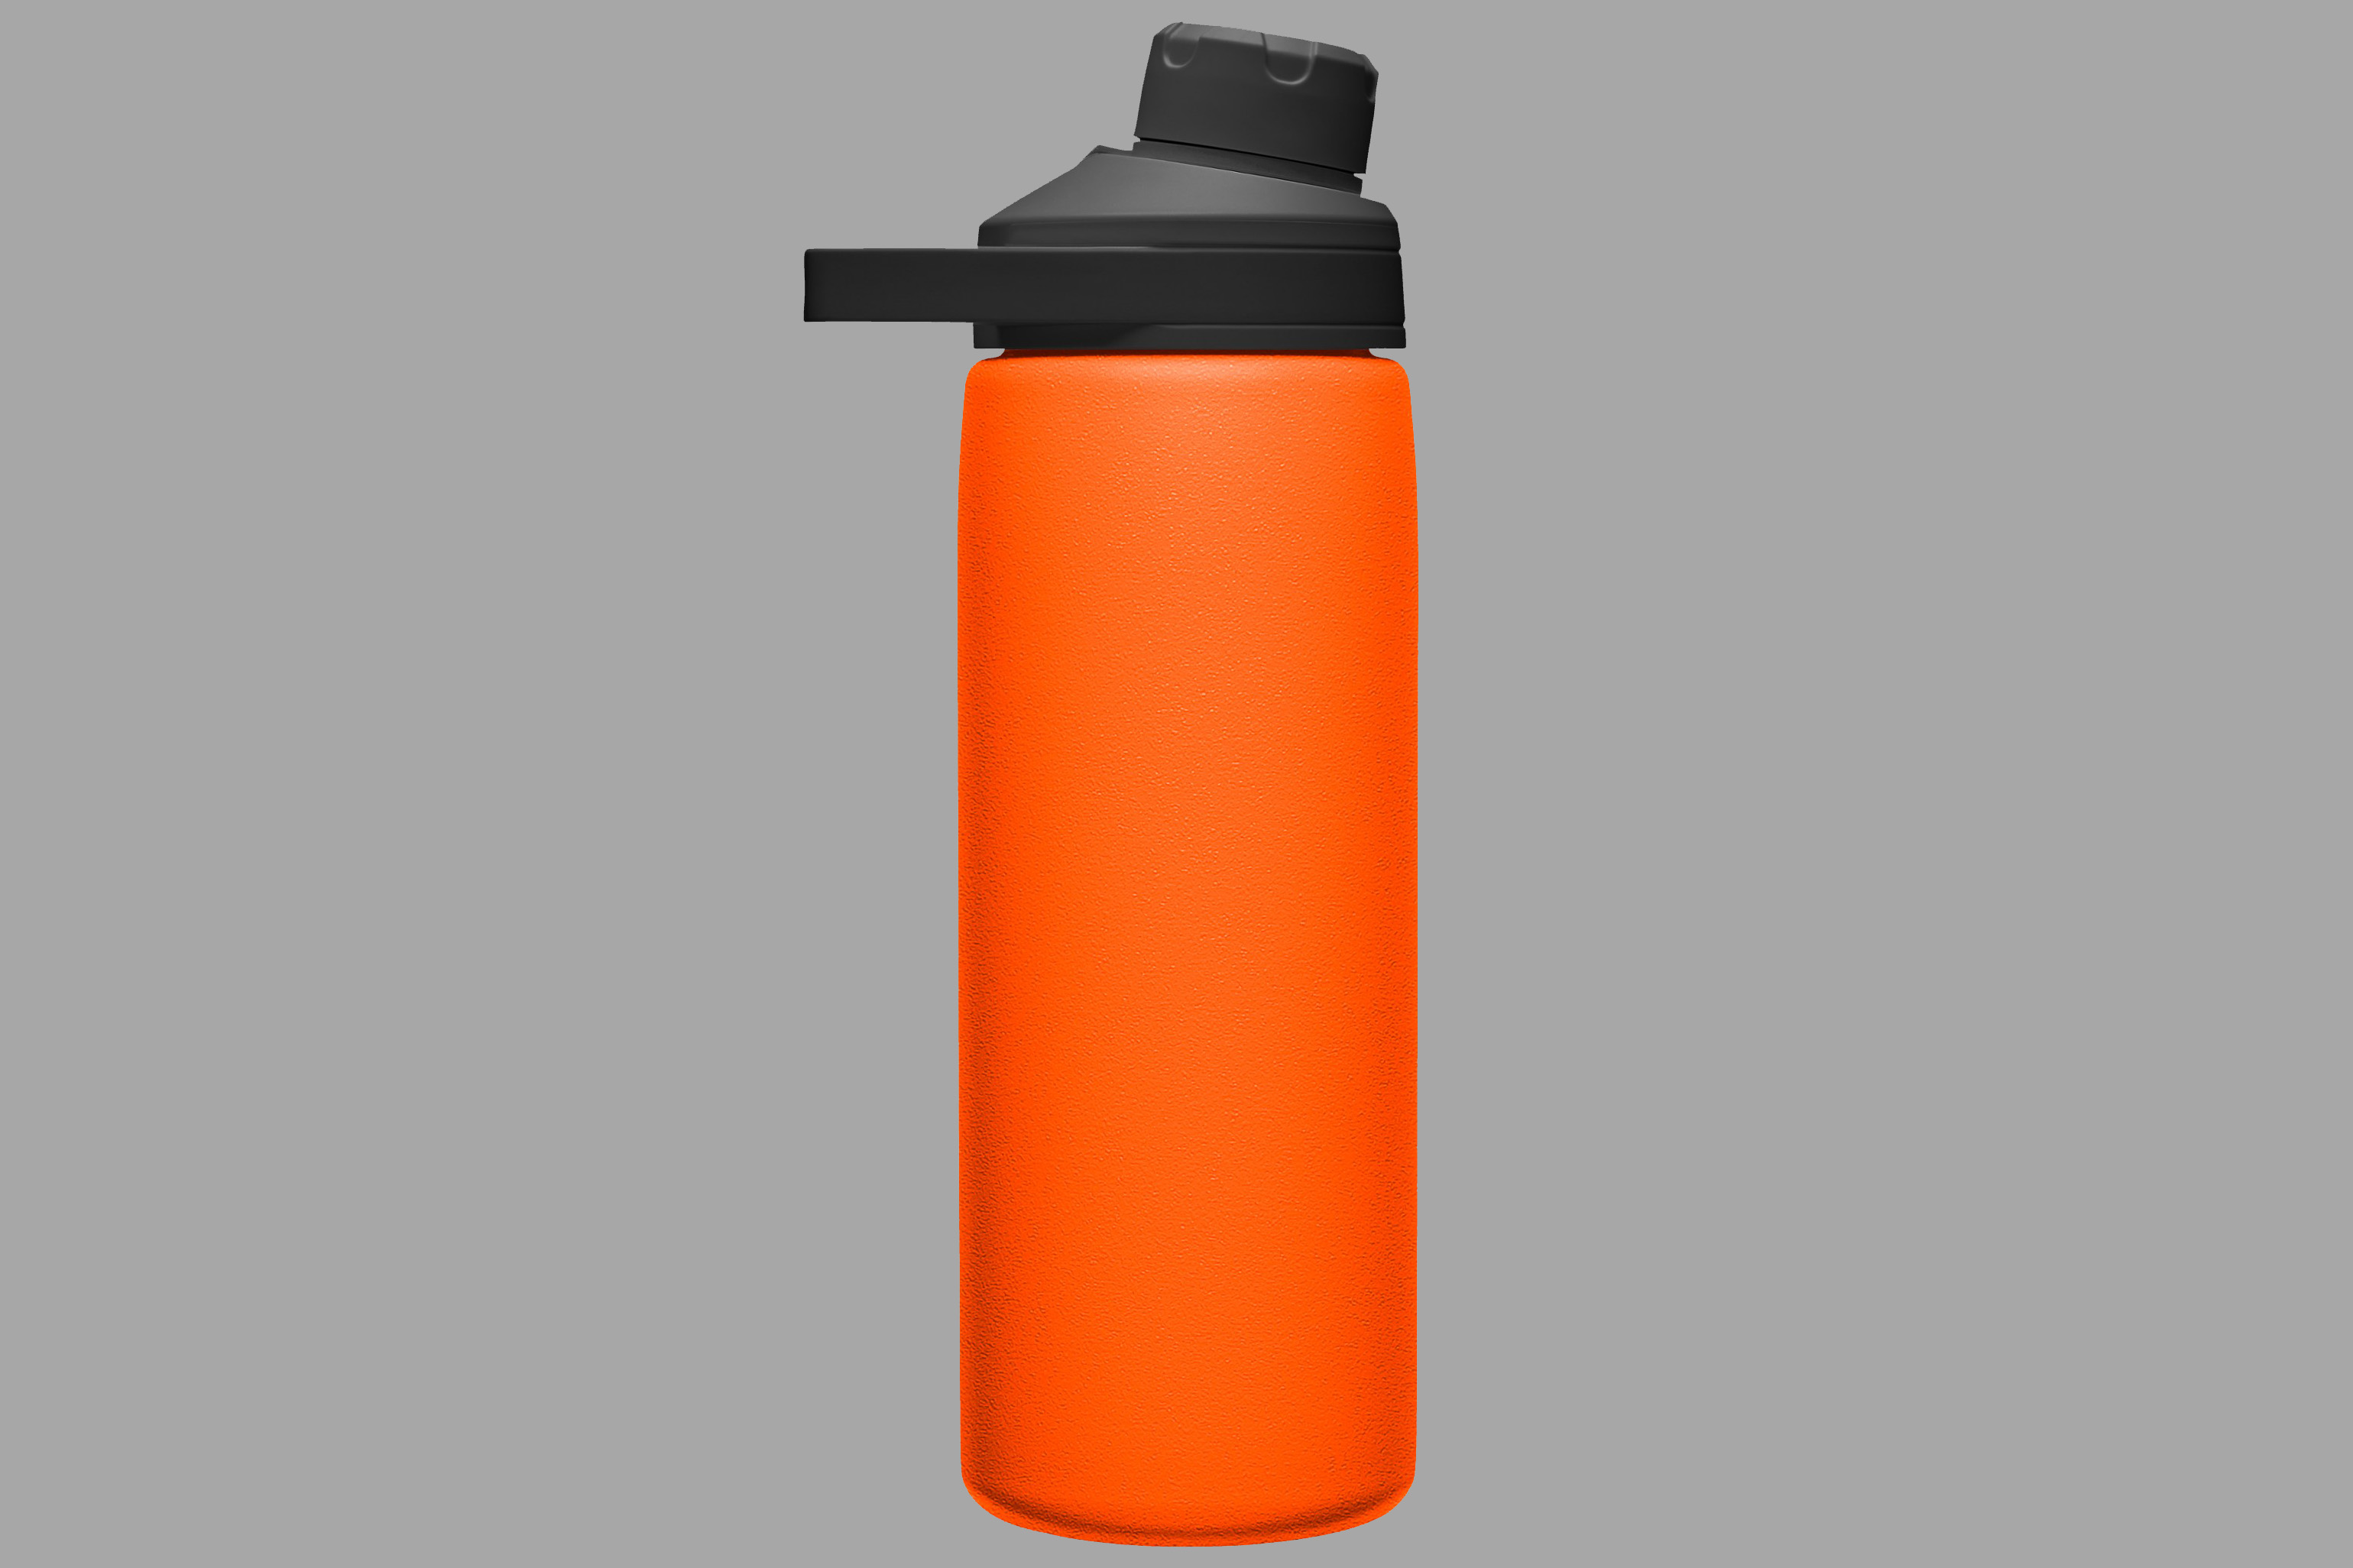 Wyld Gear Mag Series 34 Oz. Vacuum Insulated Stainless Steel Water